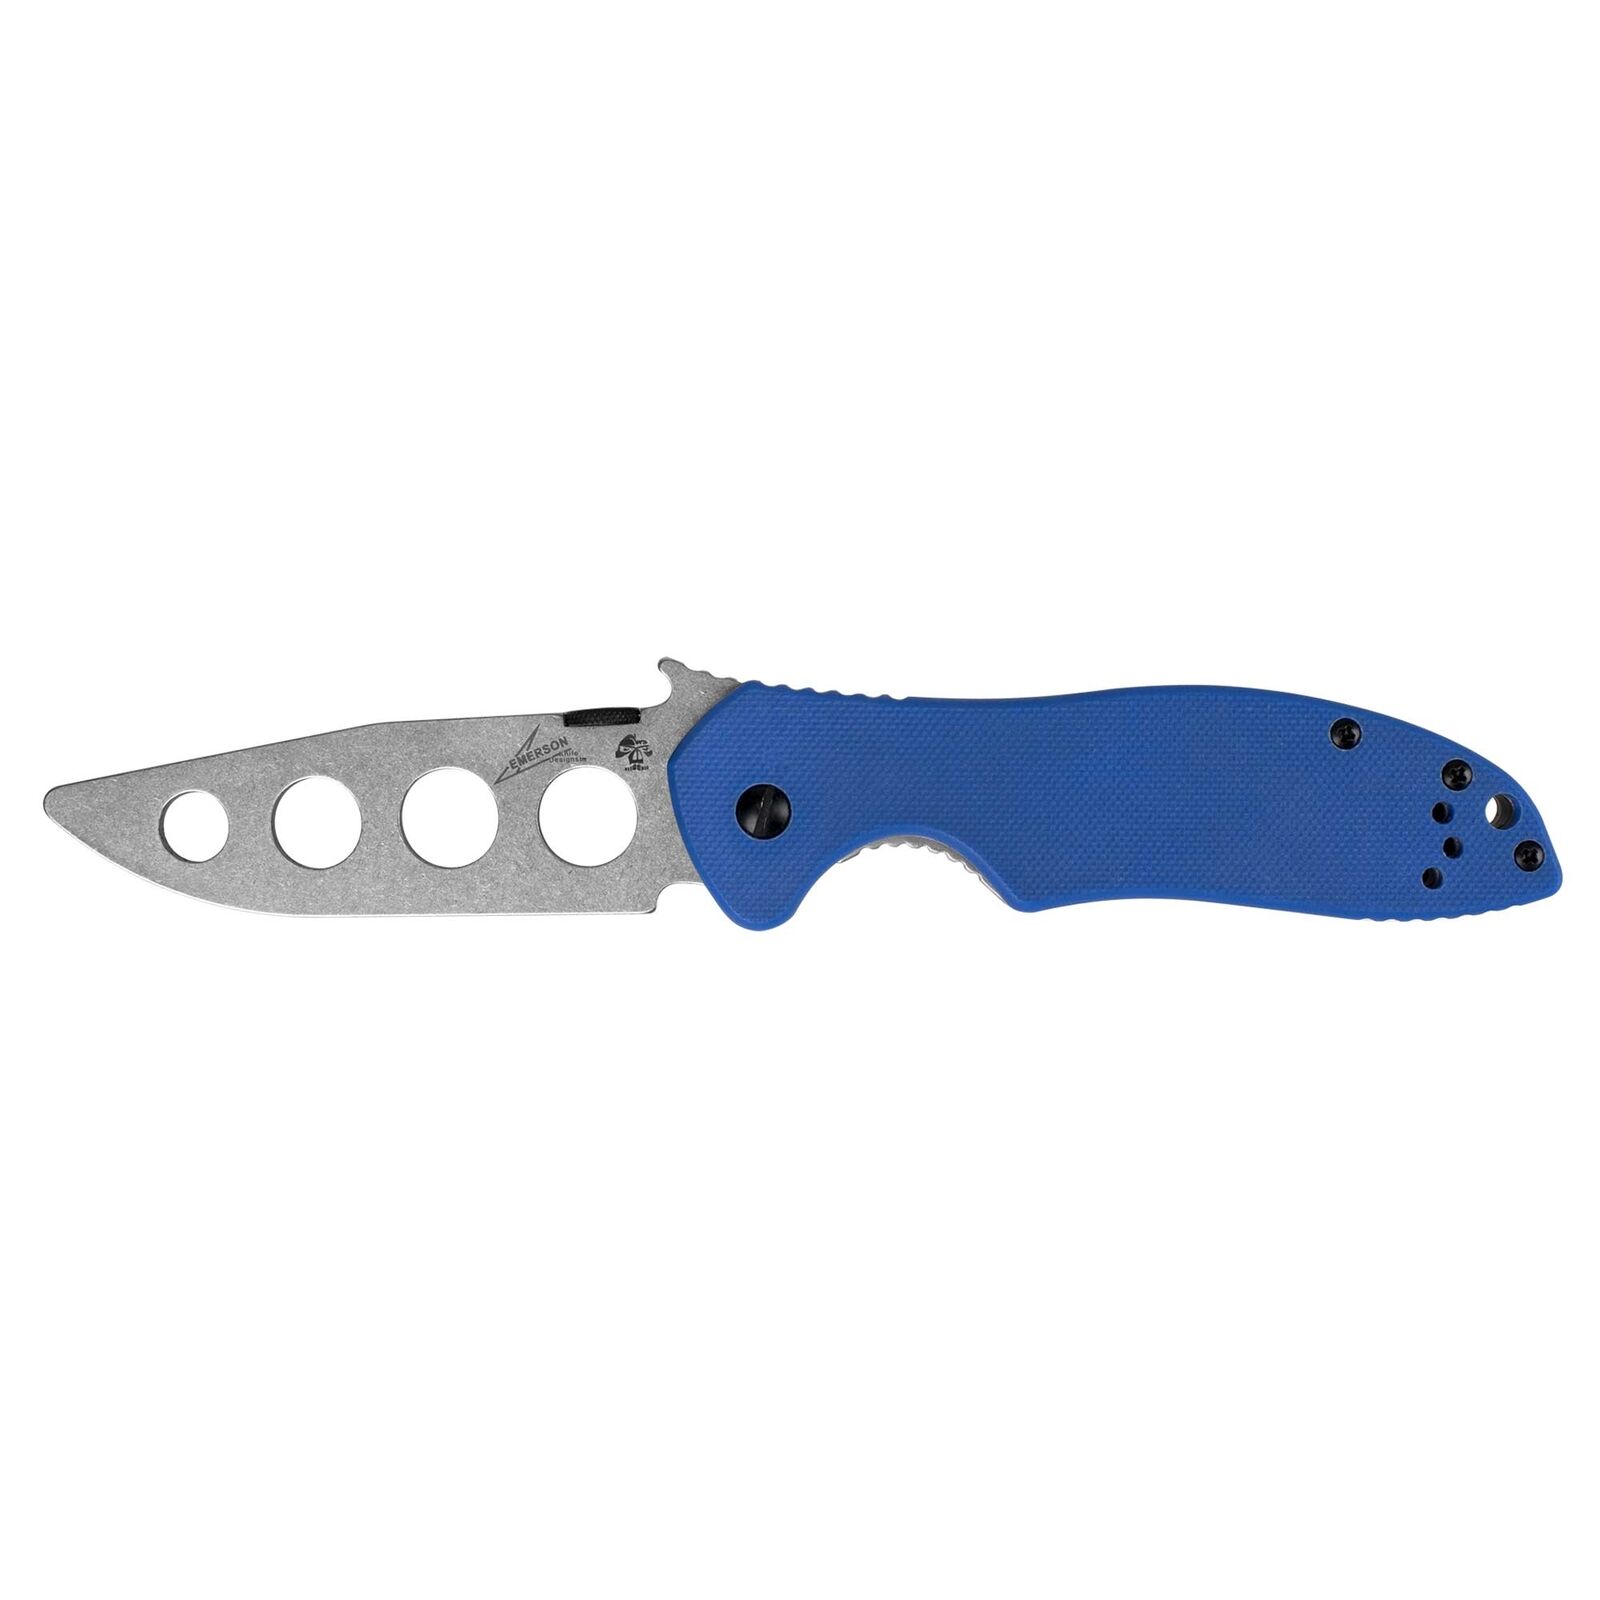 Kershaw Pocket Knife E-Train Drop Point Blade with Frame Lock KW6034TRAINER